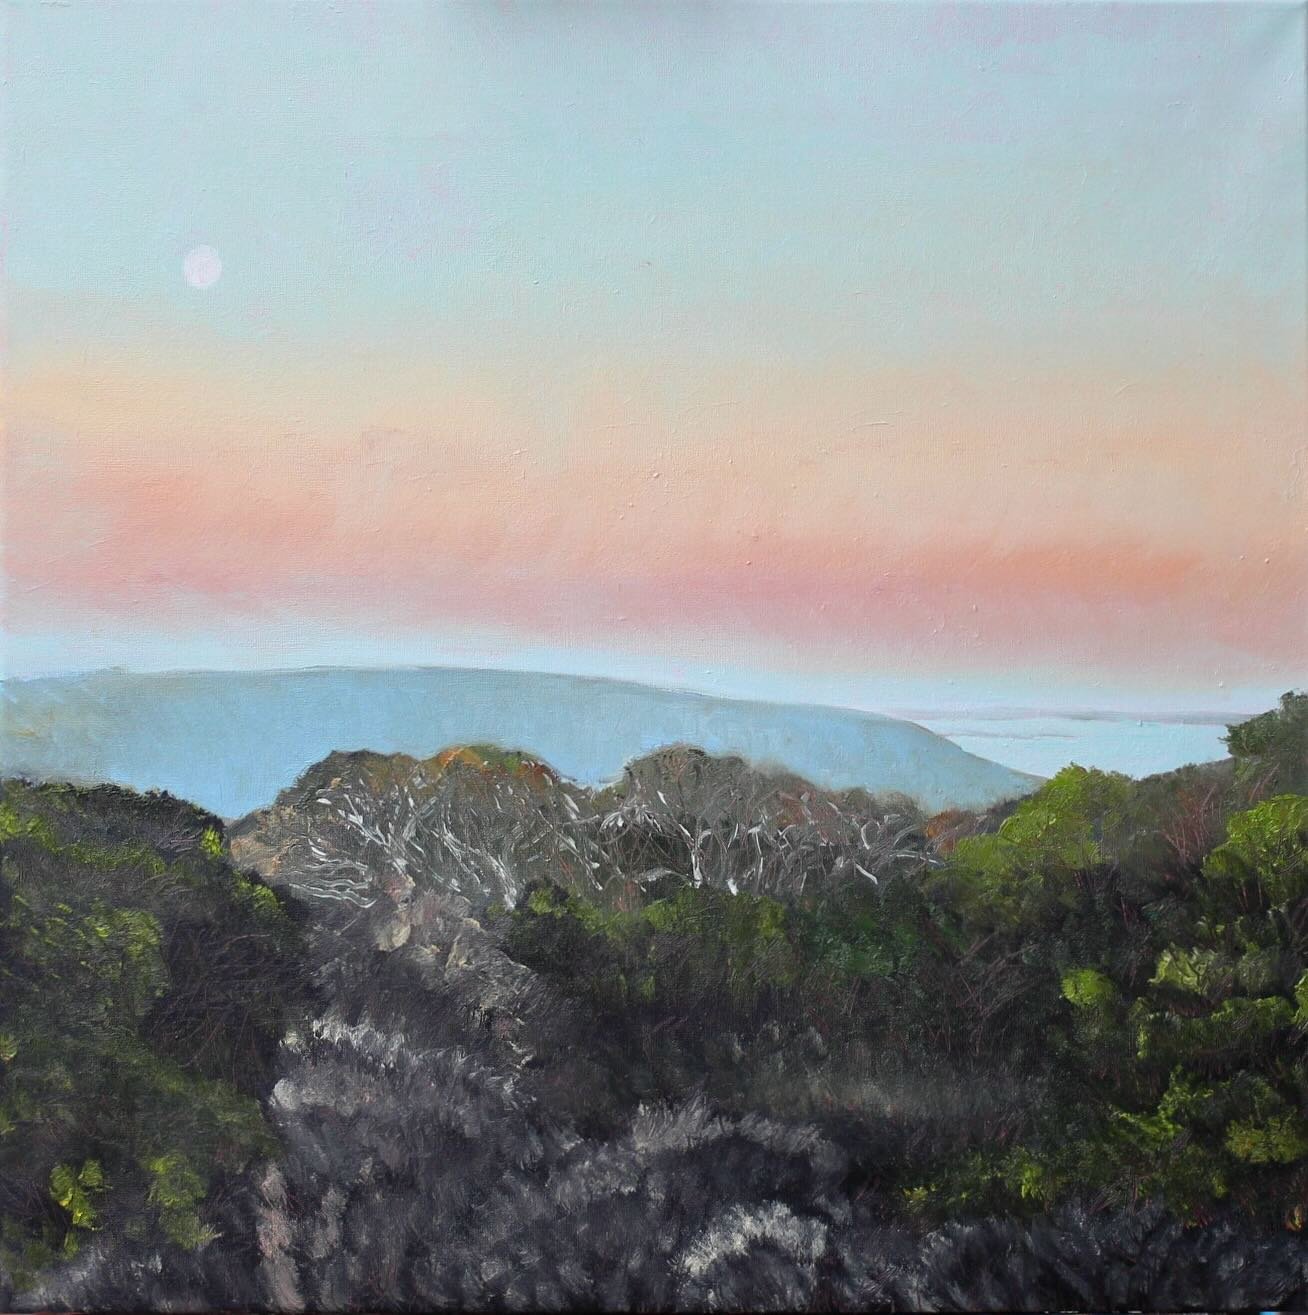 Contrasting beauty: frosty Yarra Valley mornings and peachy Bells Beach sunsets. Mid-Autumn has us longing for lazy beach days.//

&lsquo;Sunset - Bells Beach&rsquo; and &lsquo;Melting Trees&rsquo; by Beth Williams are part of our current exhibition 